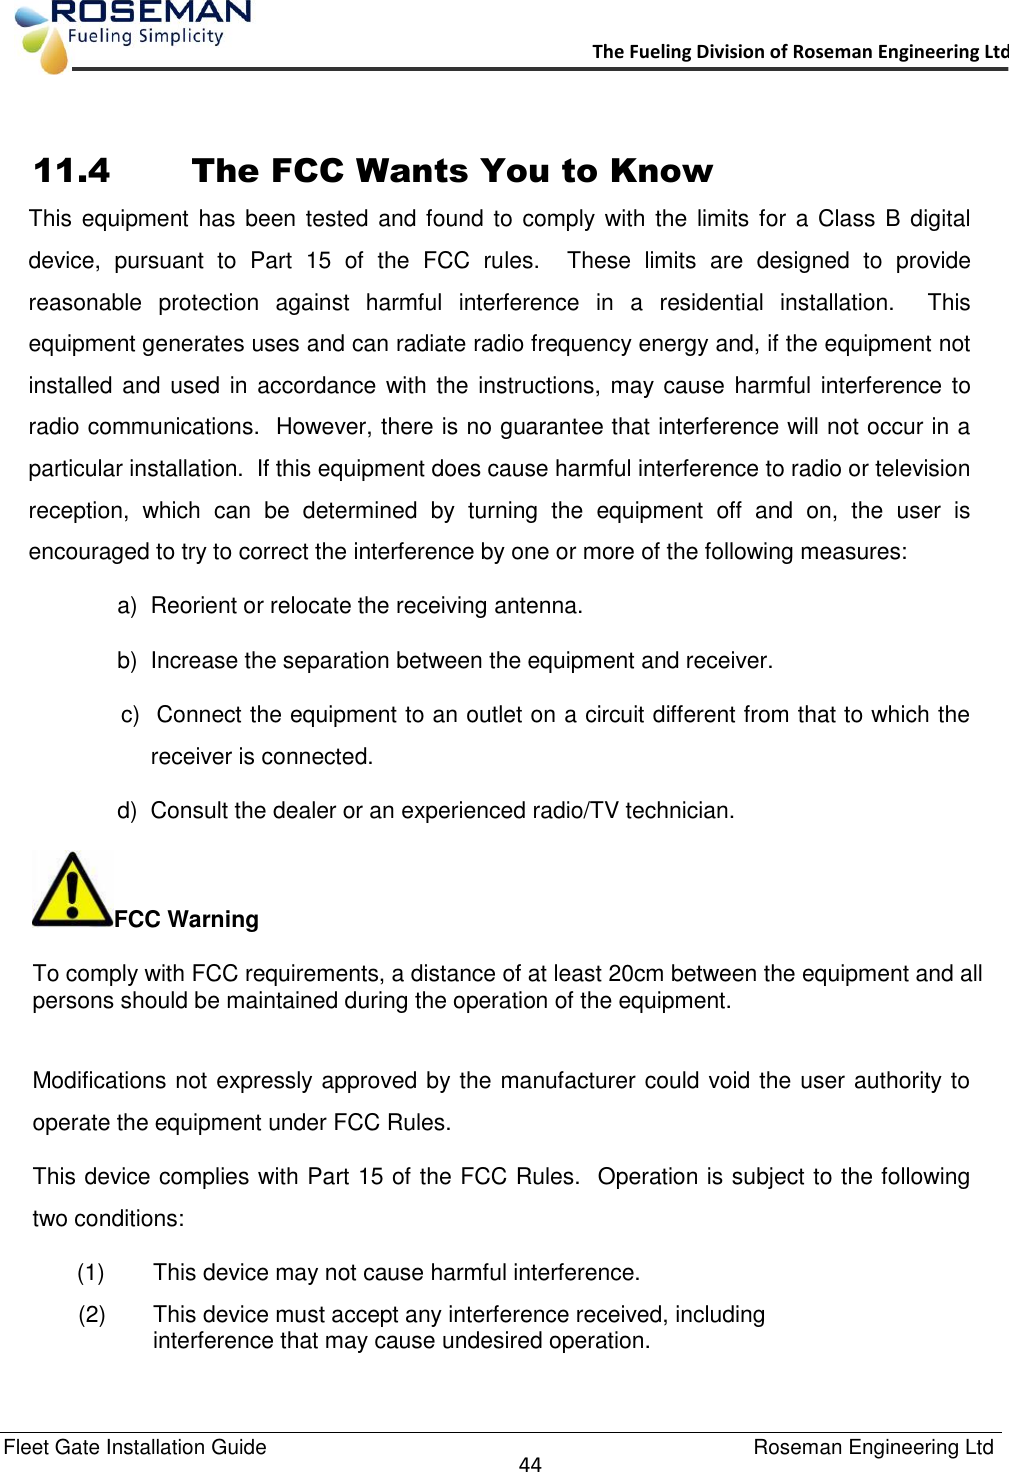   Fleet Gate Installation Guide                                                                                    Roseman Engineering Ltd  44      The Fueling Division of Roseman Engineering Ltd.                                                                  11.4     The FCC Wants You to Know This equipment has been tested  and found to  comply with  the limits  for a Class  B digital device,  pursuant  to  Part  15  of  the  FCC  rules.    These  limits  are  designed  to  provide reasonable  protection  against  harmful  interference  in  a  residential  installation.    This equipment generates uses and can radiate radio frequency energy and, if the equipment not installed and used  in accordance with the instructions,  may cause harmful interference to radio communications.  However, there is no guarantee that interference will not occur in a particular installation.  If this equipment does cause harmful interference to radio or television reception,  which  can  be  determined  by  turning  the  equipment  off  and  on,  the  user  is encouraged to try to correct the interference by one or more of the following measures: a)  Reorient or relocate the receiving antenna. b)  Increase the separation between the equipment and receiver. c)  Connect the equipment to an outlet on a circuit different from that to which the receiver is connected. d)  Consult the dealer or an experienced radio/TV technician. FCC Warning To comply with FCC requirements, a distance of at least 20cm between the equipment and all persons should be maintained during the operation of the equipment.  Modifications not expressly approved by the manufacturer could void the user authority to operate the equipment under FCC Rules. This device complies with Part 15 of the FCC Rules.  Operation is subject to the following two conditions: (1)  This device may not cause harmful interference.   (2)  This device must accept any interference received, including interference that may cause undesired operation. 